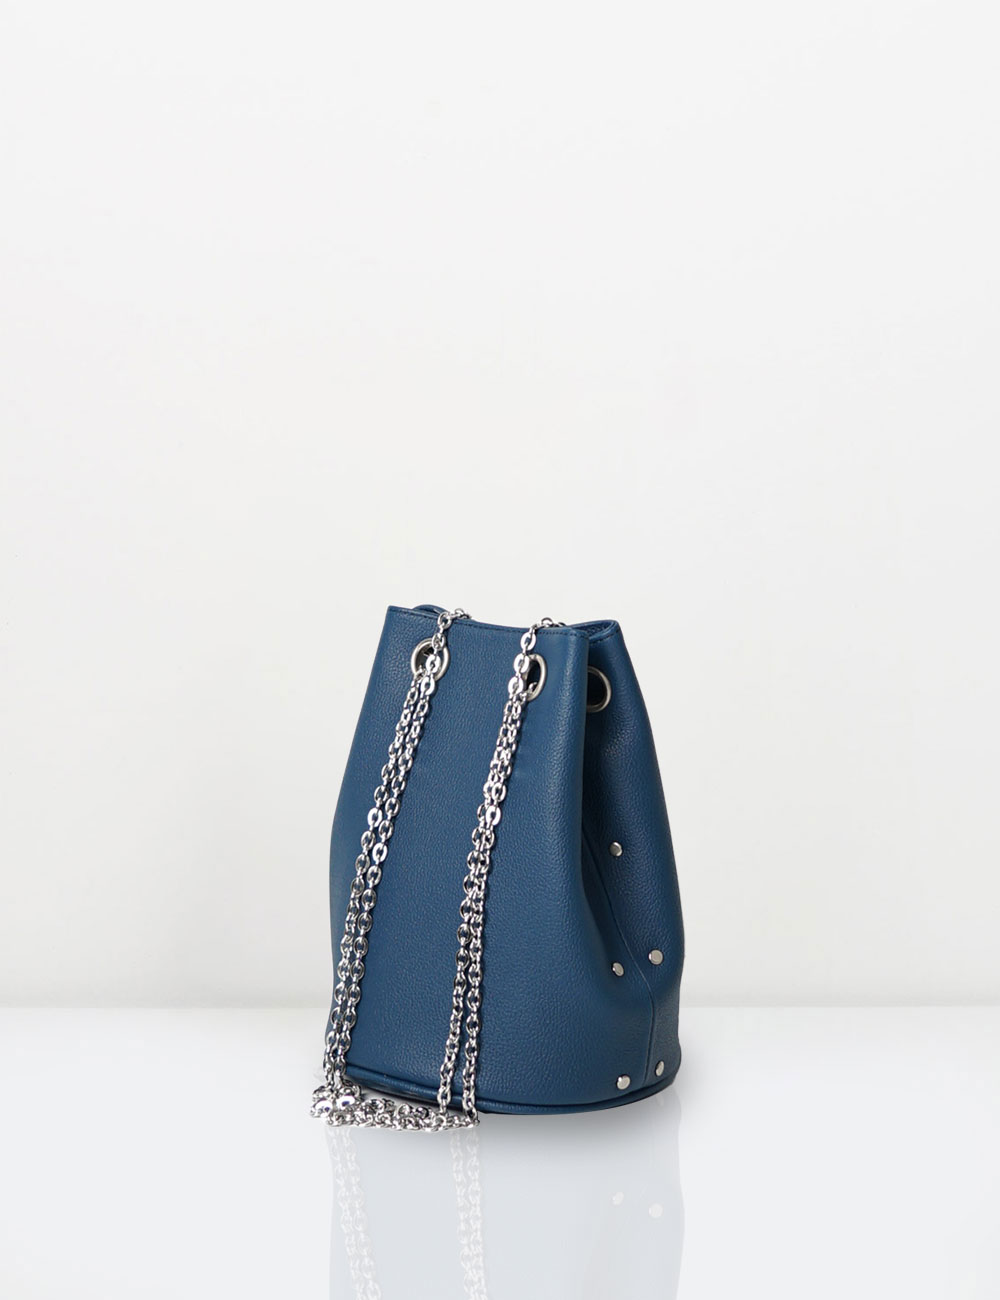 12mini chain bag / midnight blue (sold out)